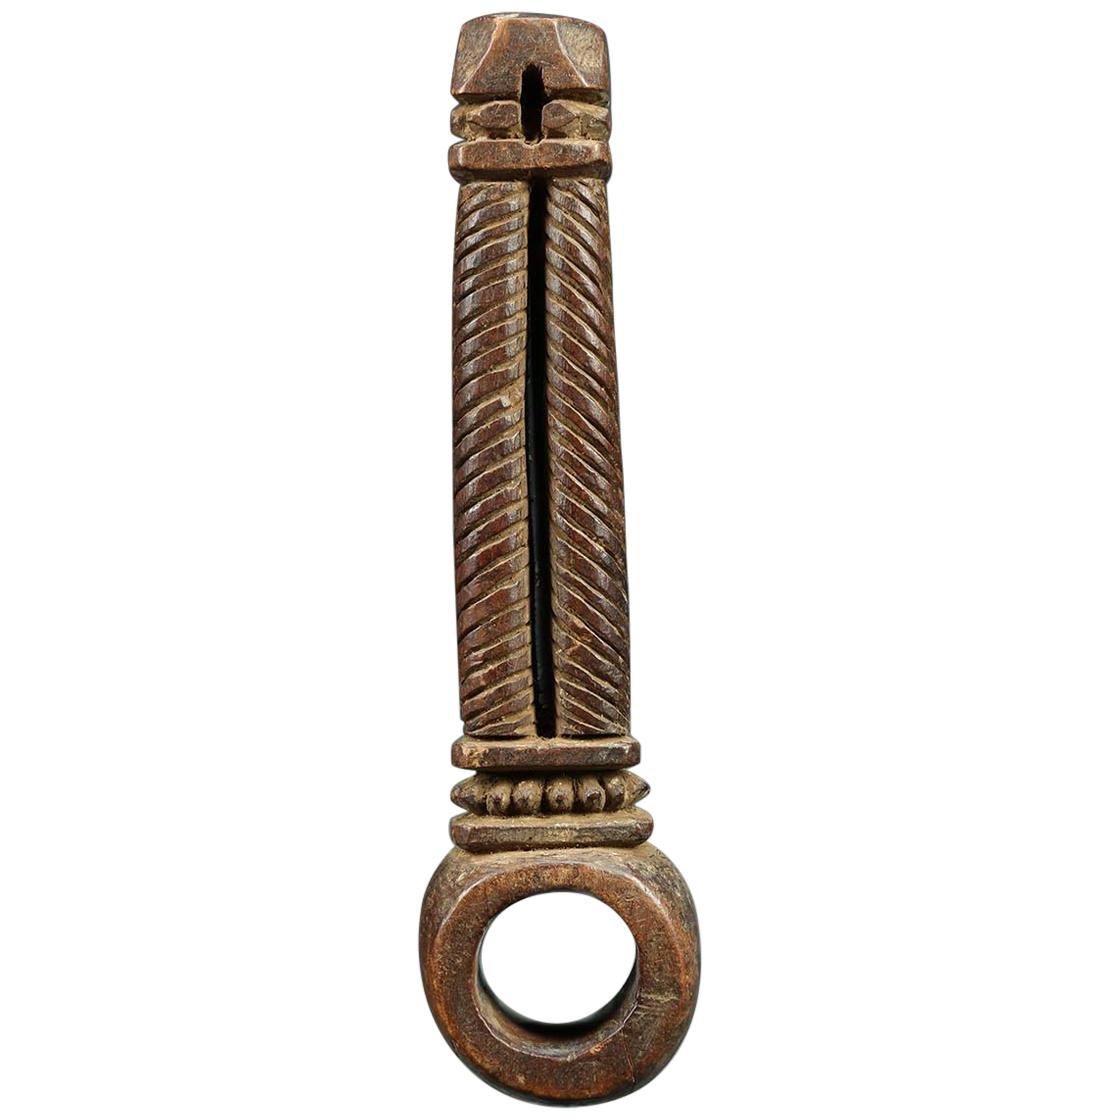 Nepal Ghurra Butter Churn Handle, Early 20th Century